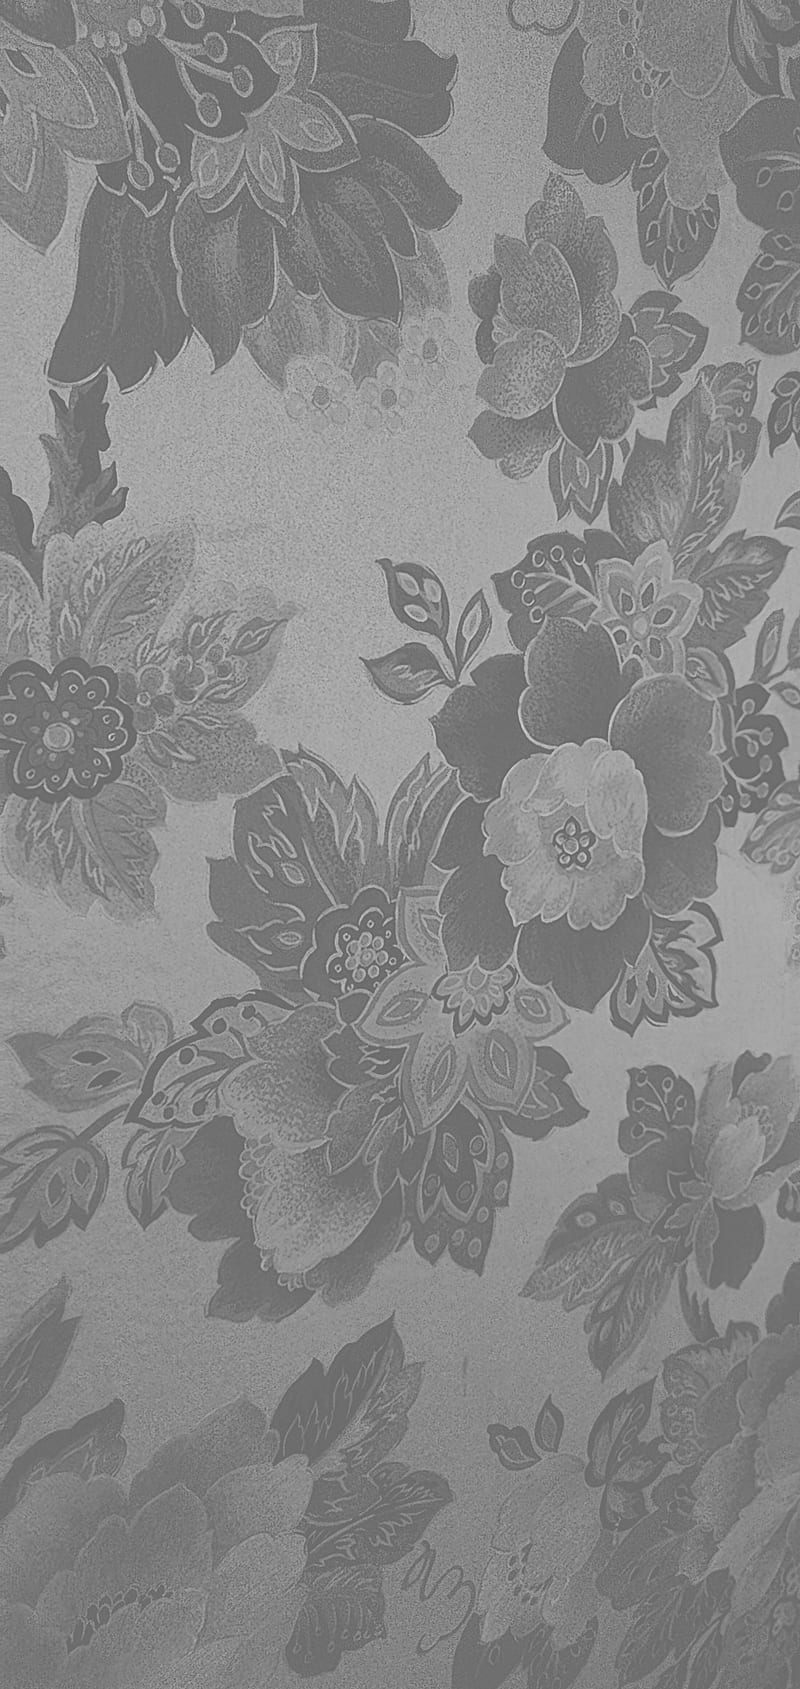 50 Amazing Floral Wallpapers  Gathered Living  Grey wallpaper Grey  floral wallpaper Floral wallpaper